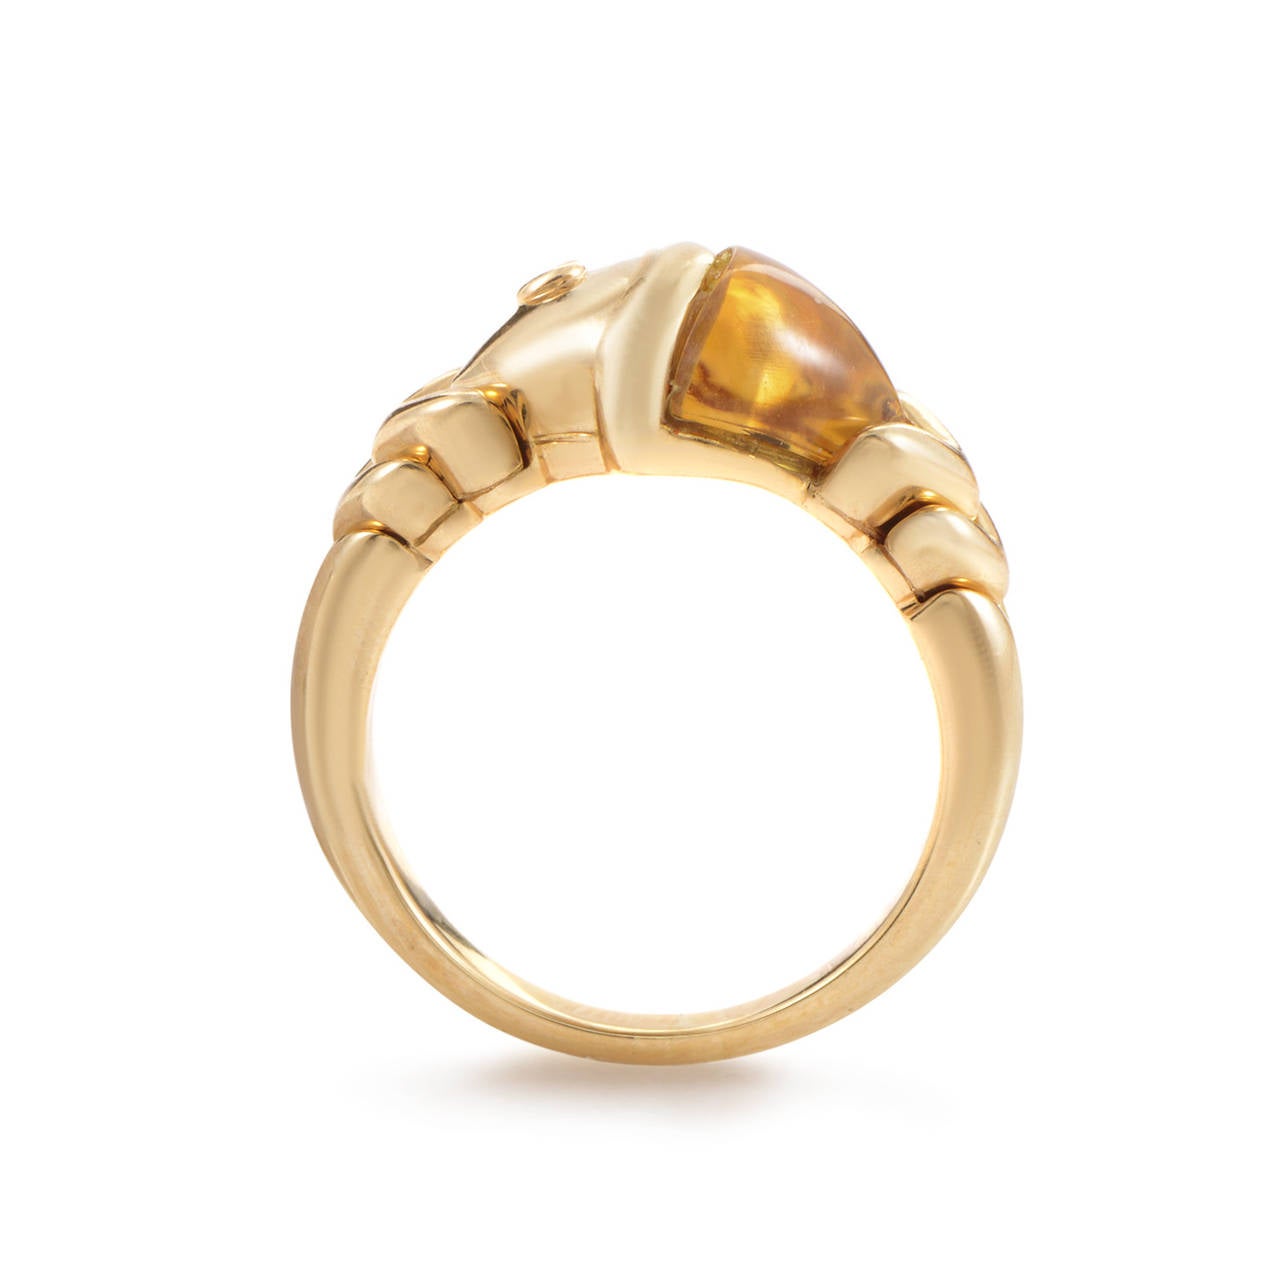 The allure of citrine combined with the dazzling elegance of diamonds makes this Bulgari ring a wonderful fashion accessory to accent any kind of wear. To complete the ring's glamorous look, it is made of polished 18K yellow gold, giving it a very